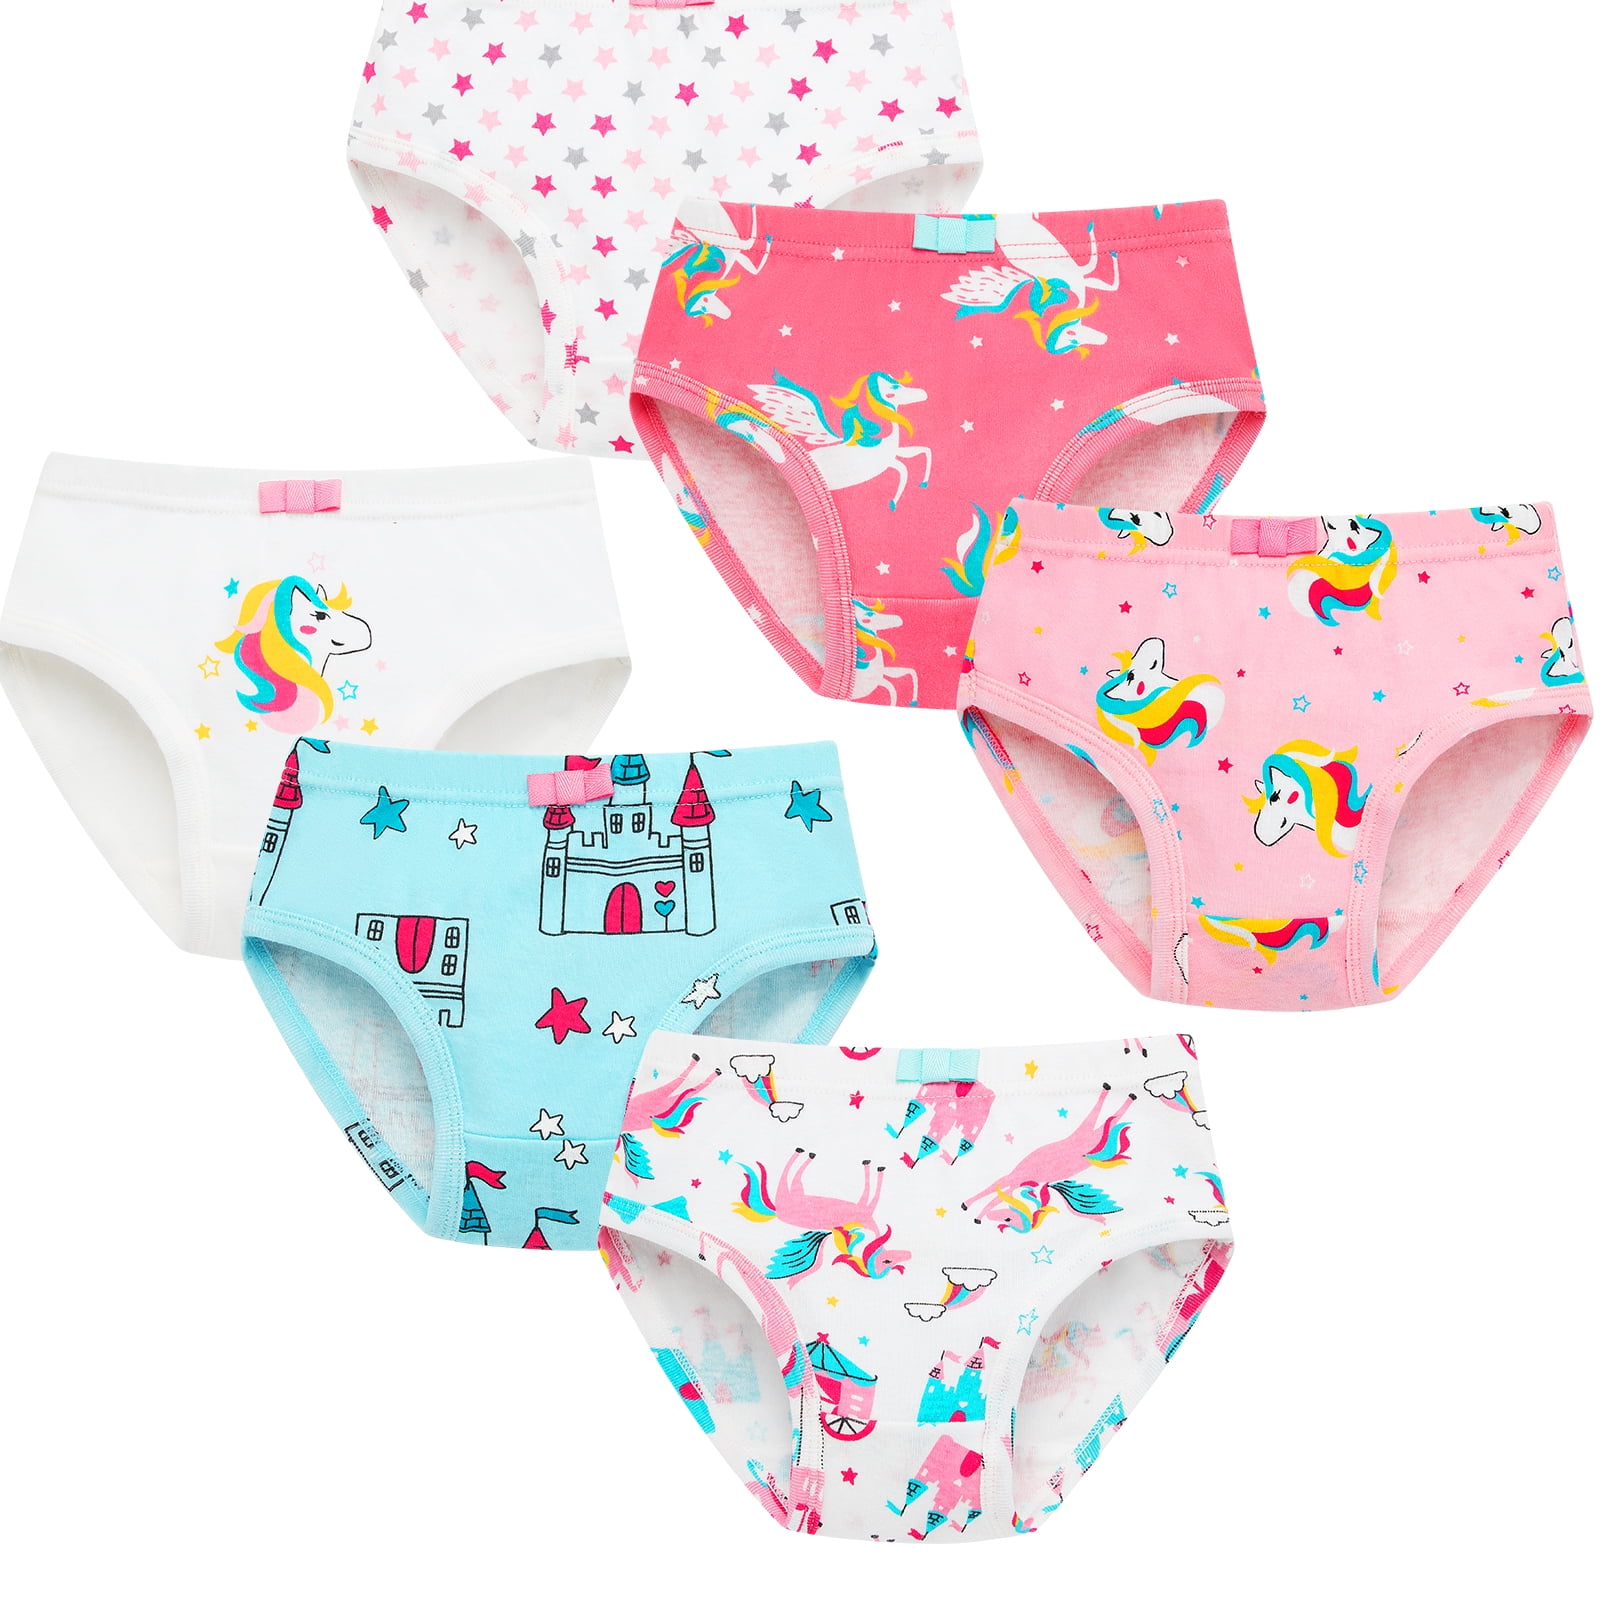 Chili Peppers Toddler Girls Underwear, 20-Pack, 2T-4T 